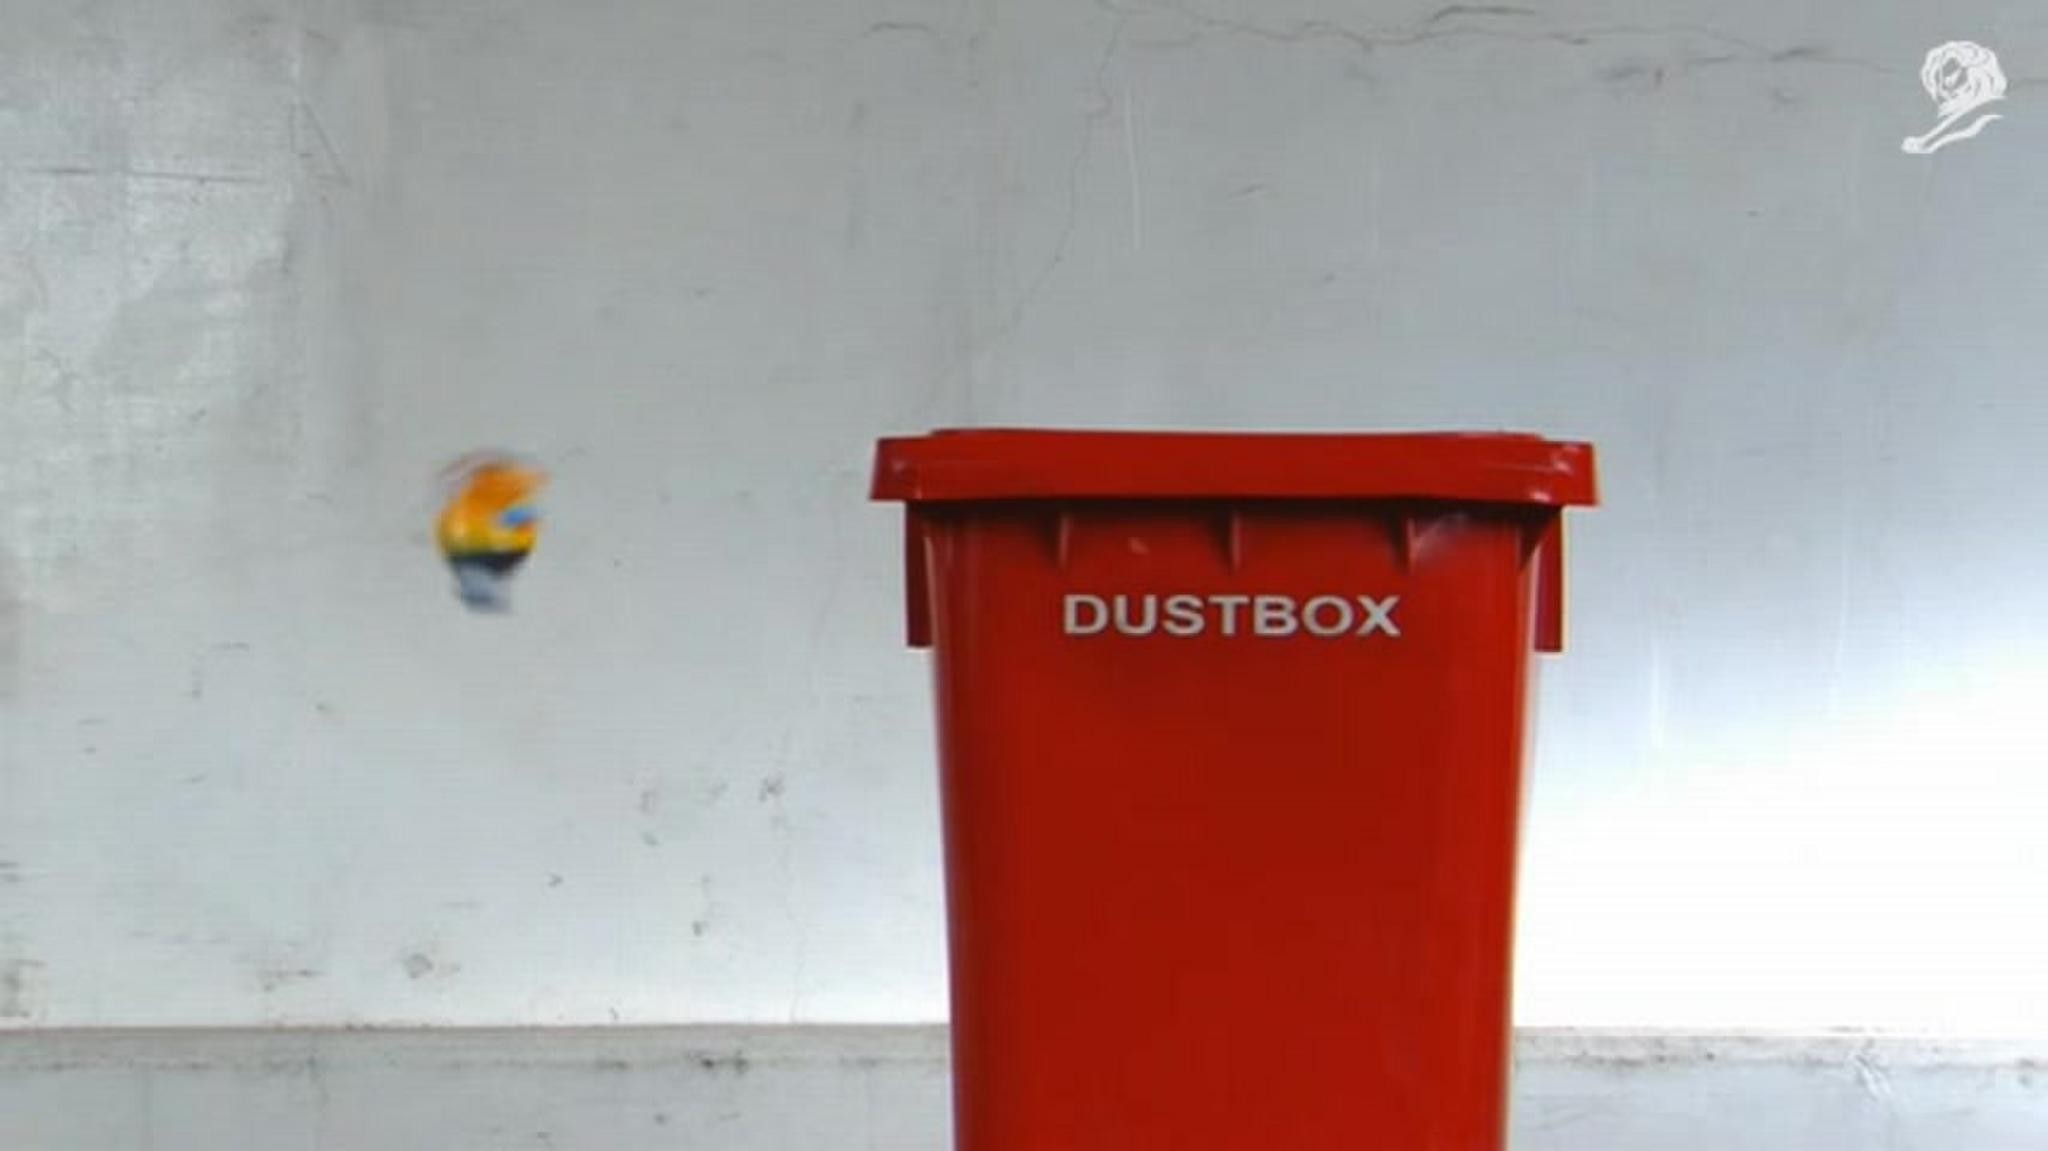 FIRST, DISPOSE THE CONCEPT OF GARBAGE